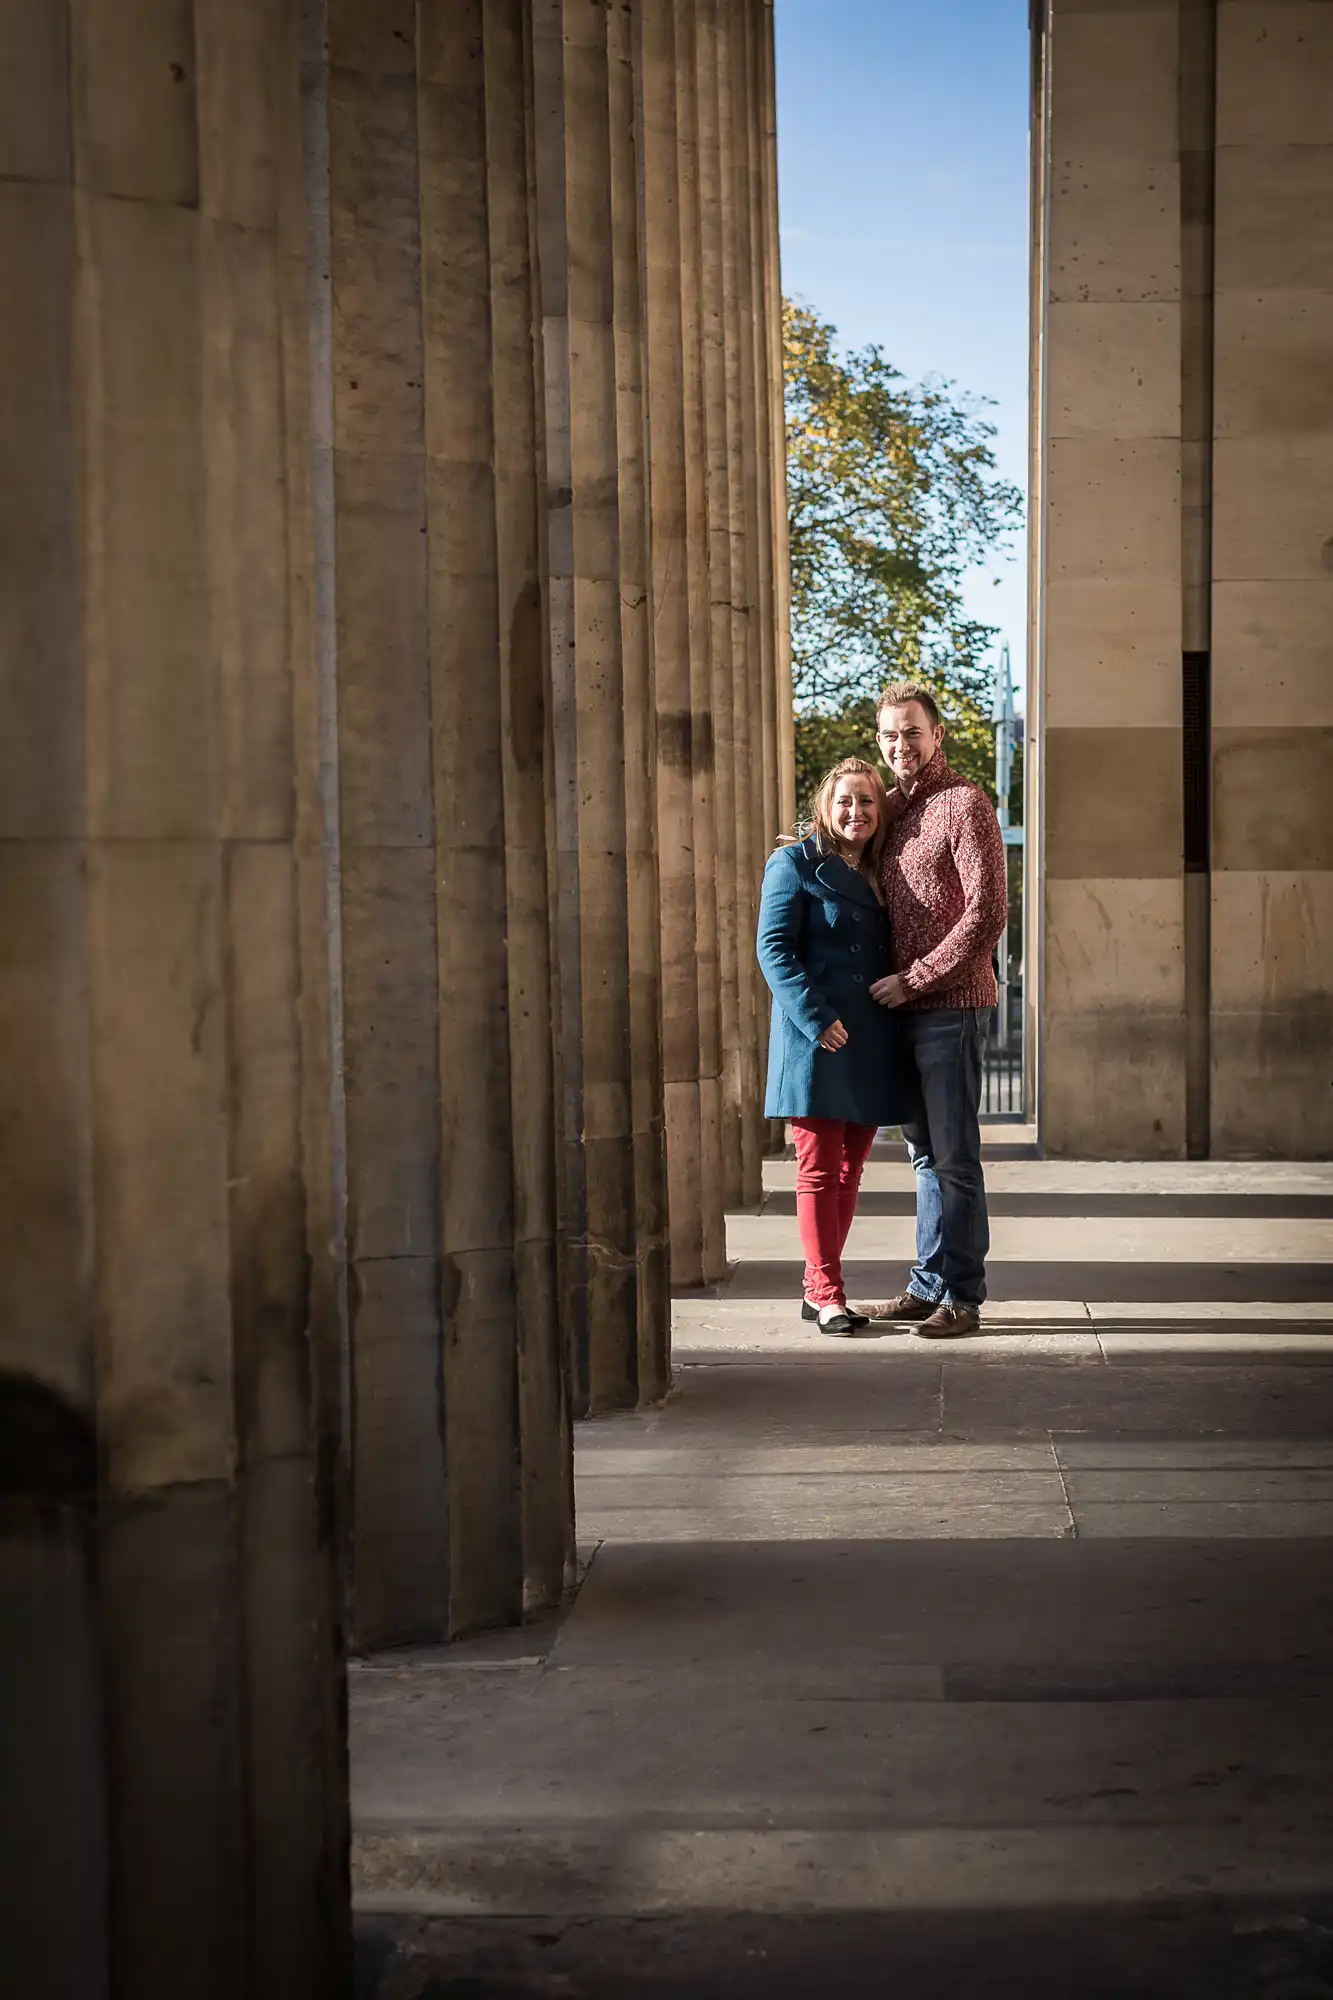 A couple embracing, standing between tall stone columns, with sunlight illuminating their smiling faces.